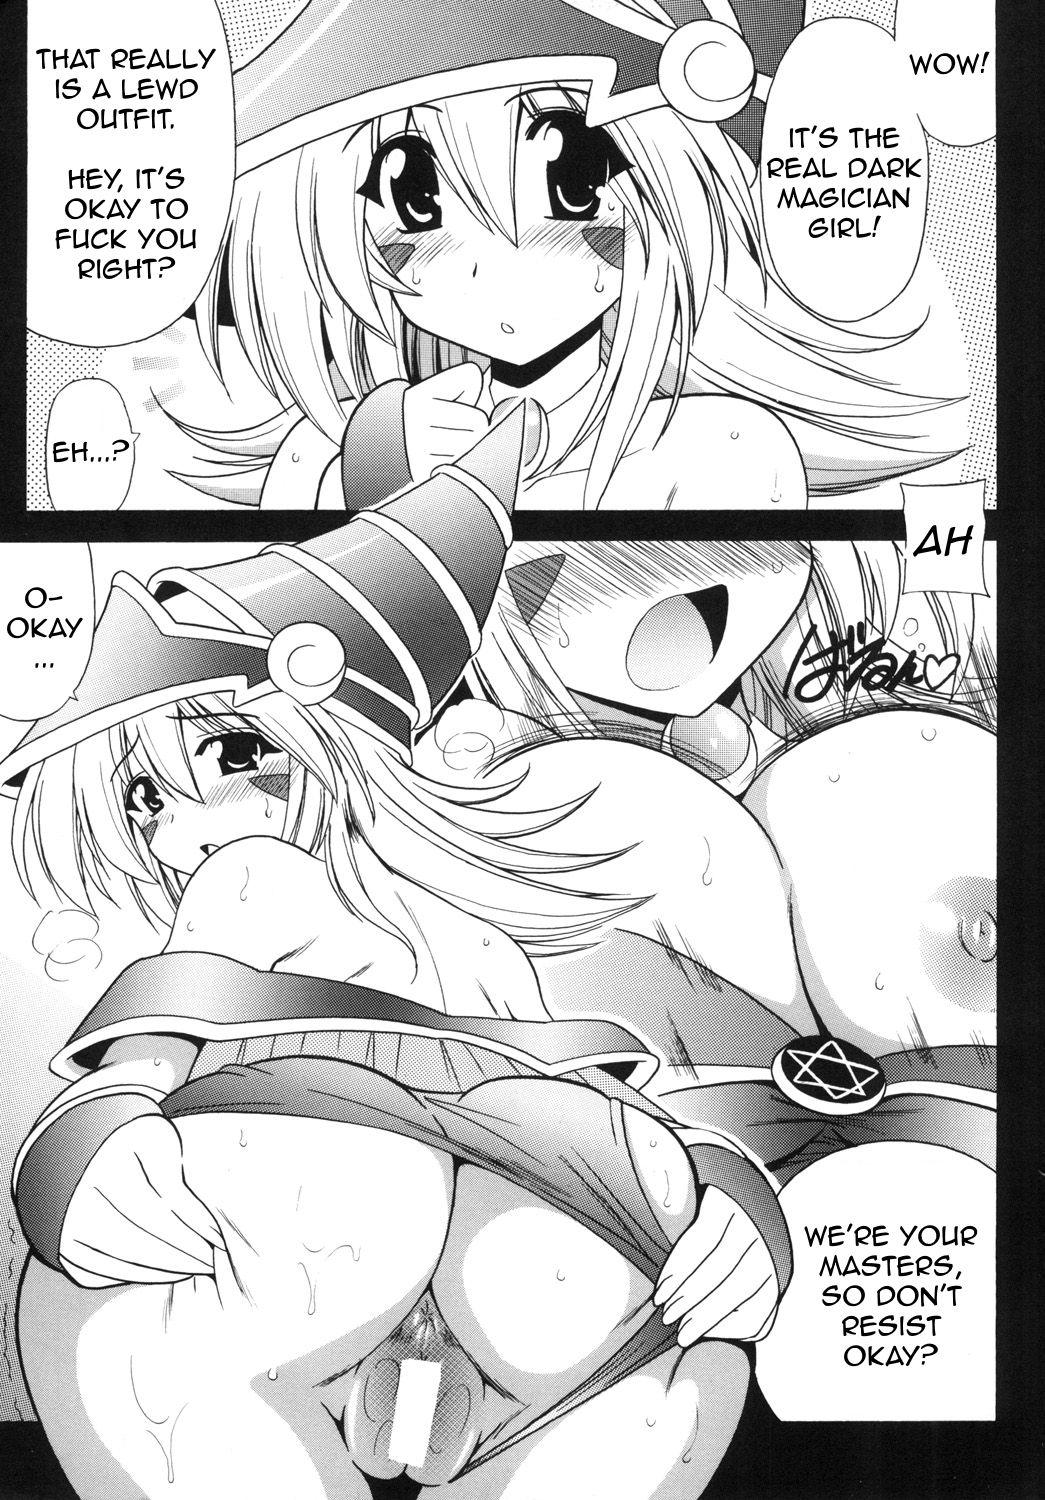 BMG to Ecchi Shiyou ♡ | Let's Have Sex with Dark Magician Girl ♡ 2